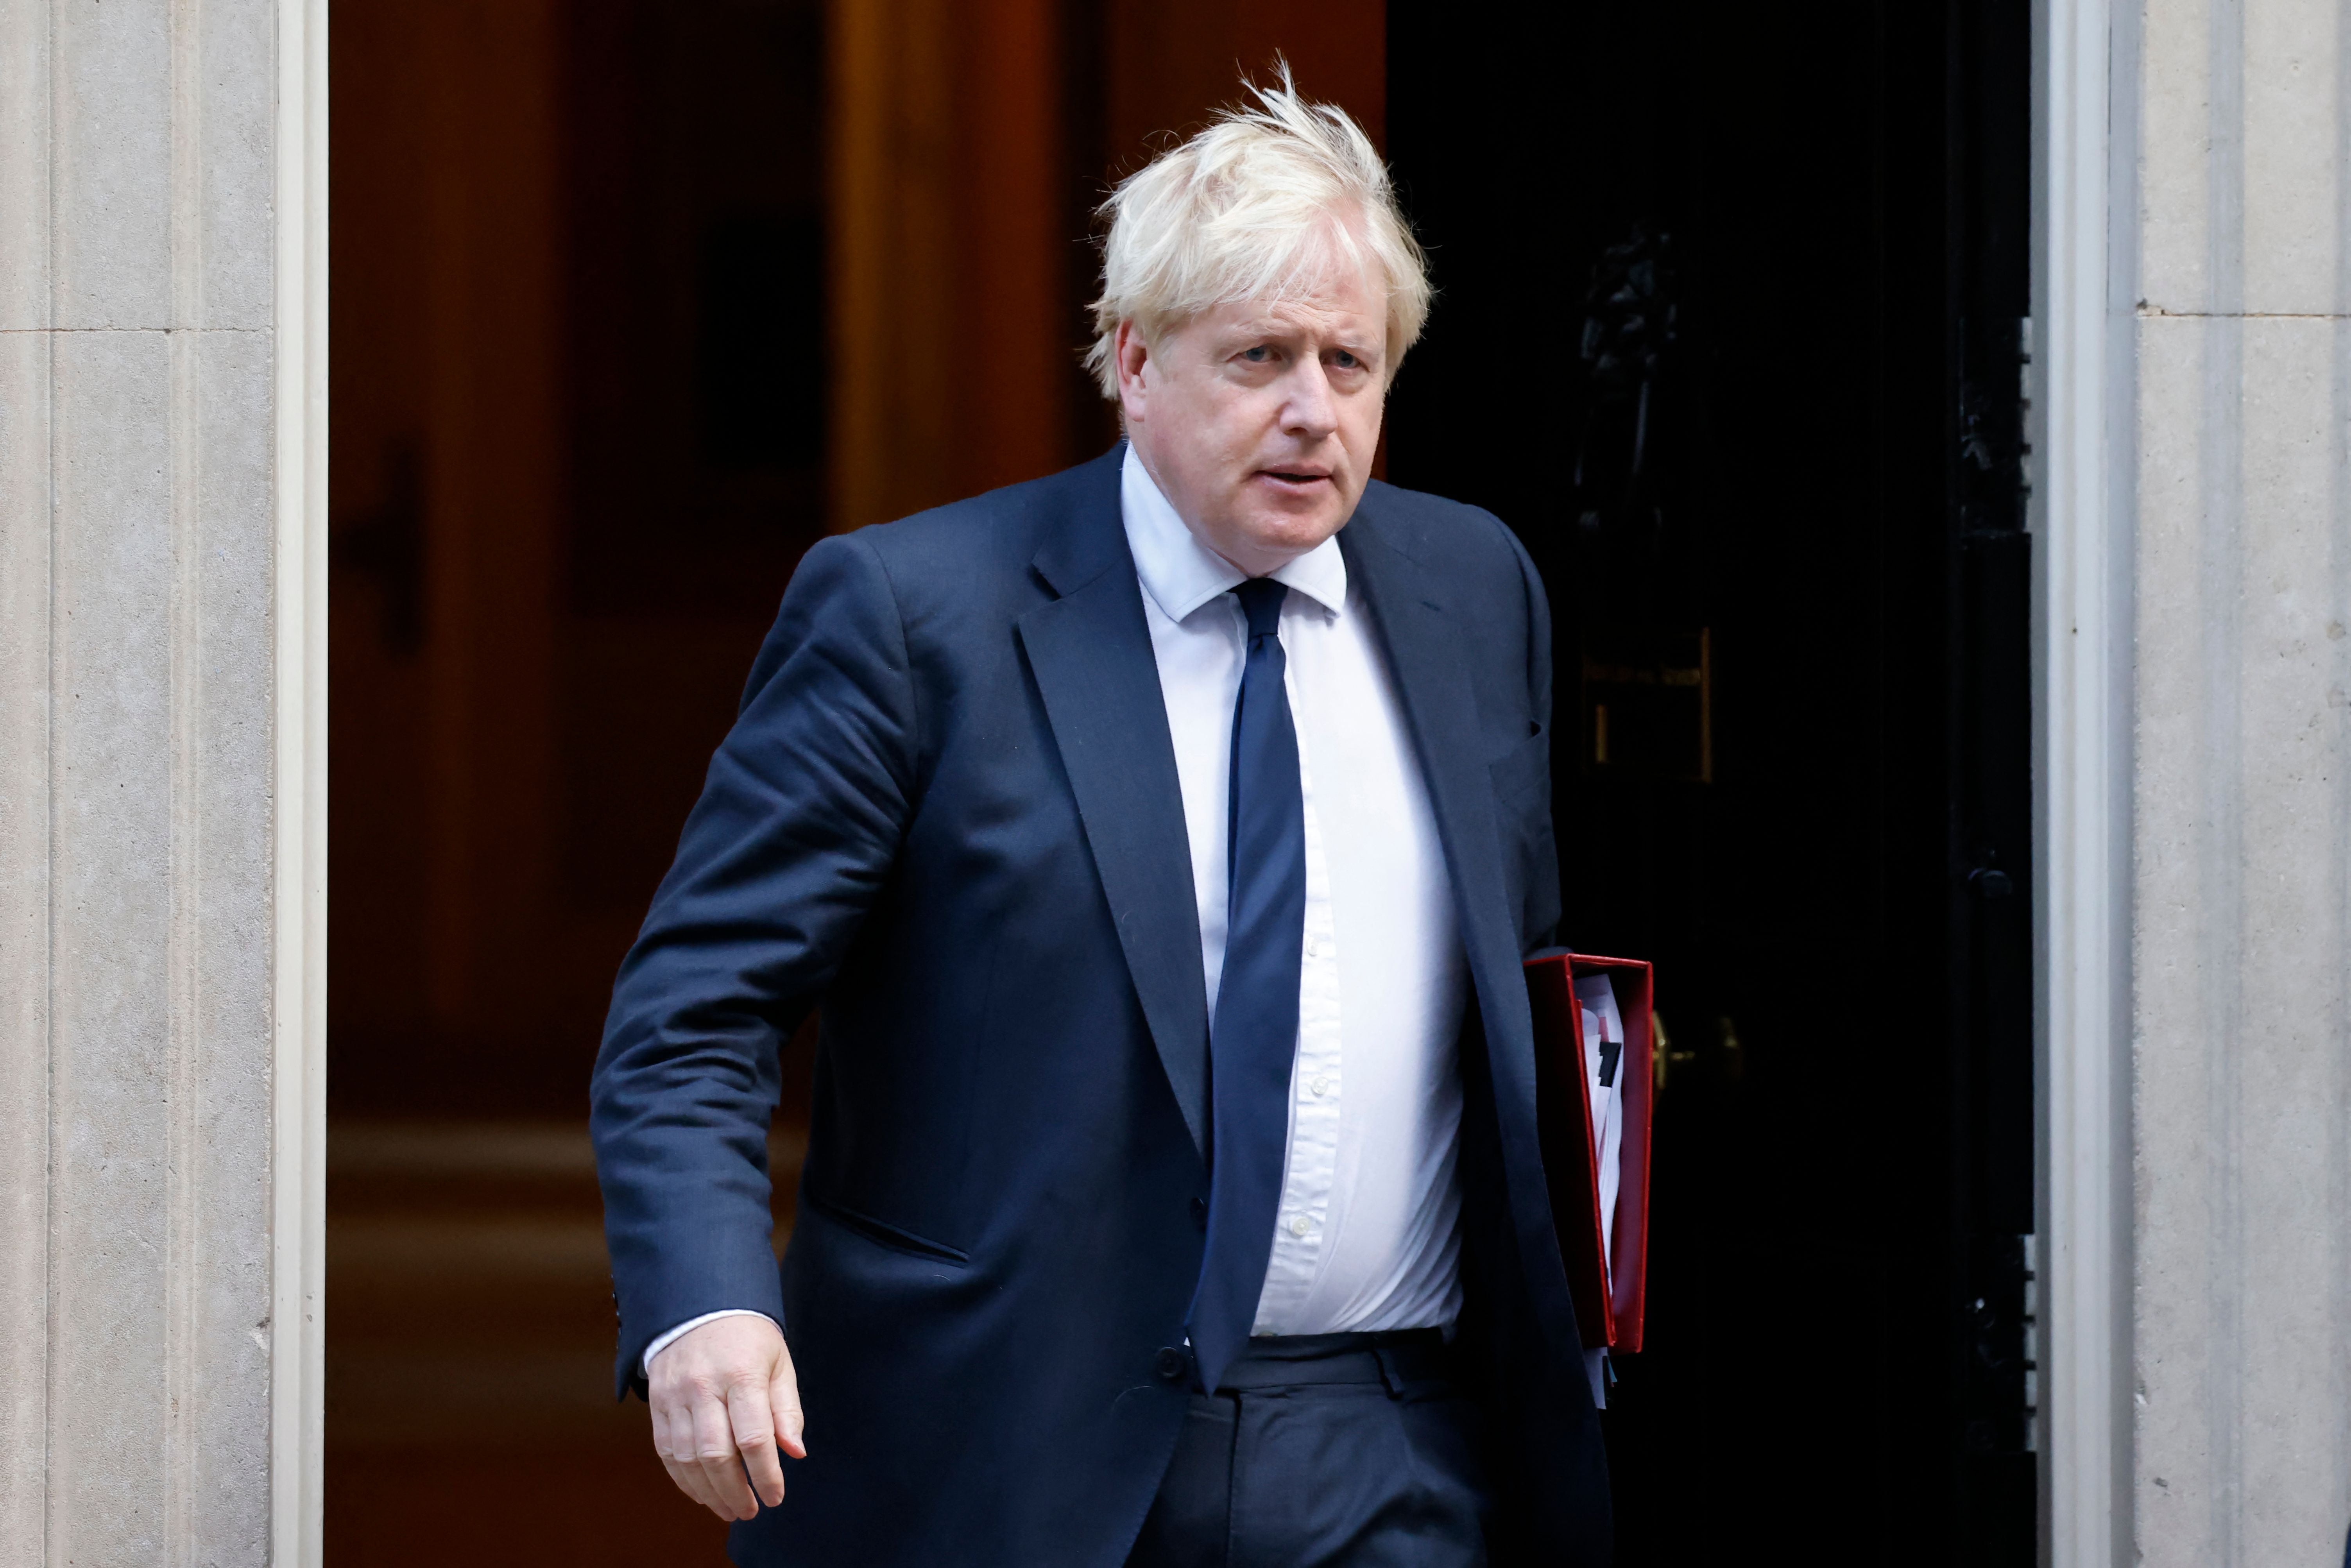 Boris Johnson leaving No 10 to take part in PMQs on Wednesday